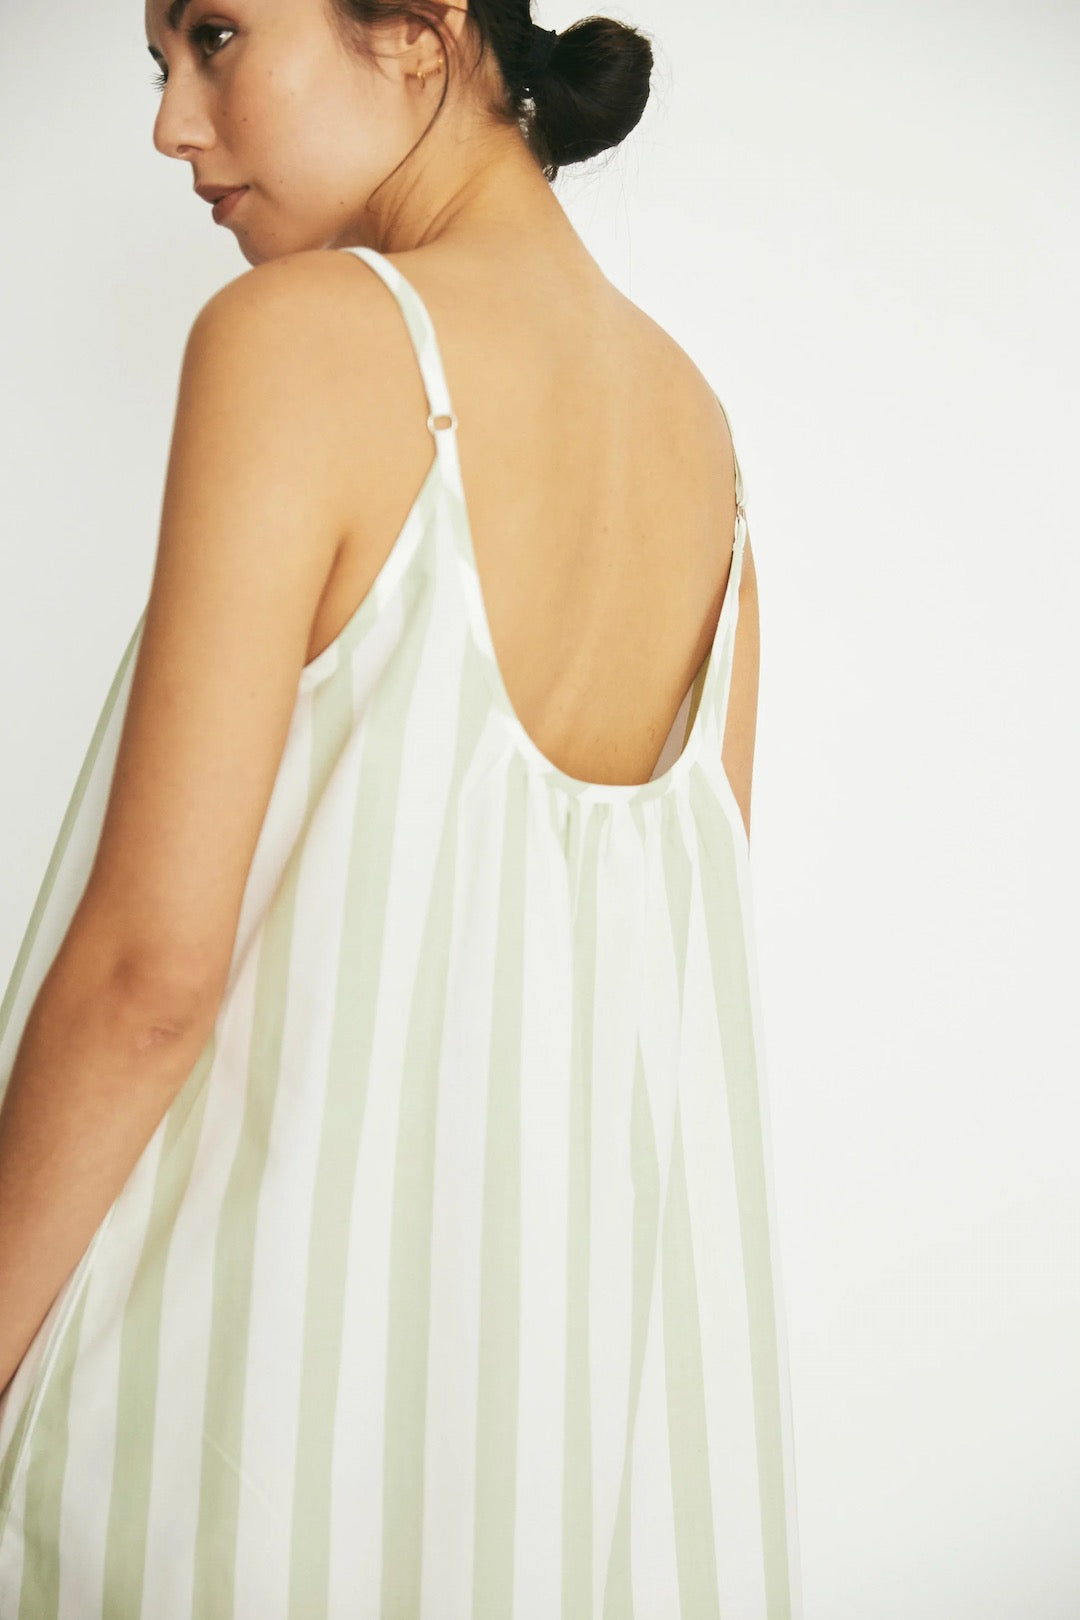 The back view of a woman wearing an Evie Slip - Pear Stripe dress by general sleep.